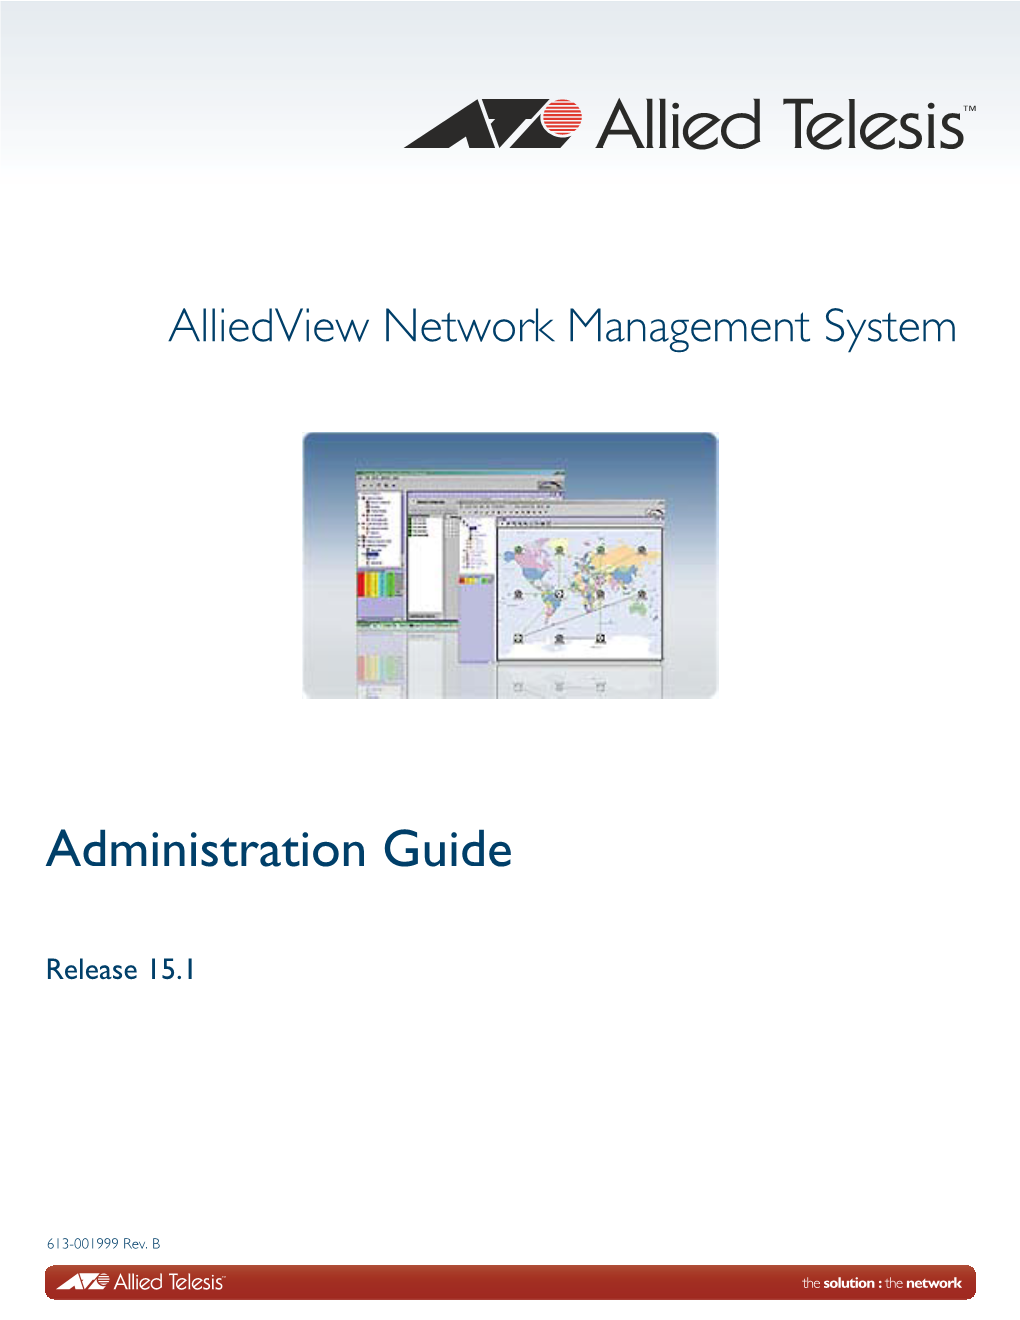 Alliedview Network Management System (NMS) Administration Guide